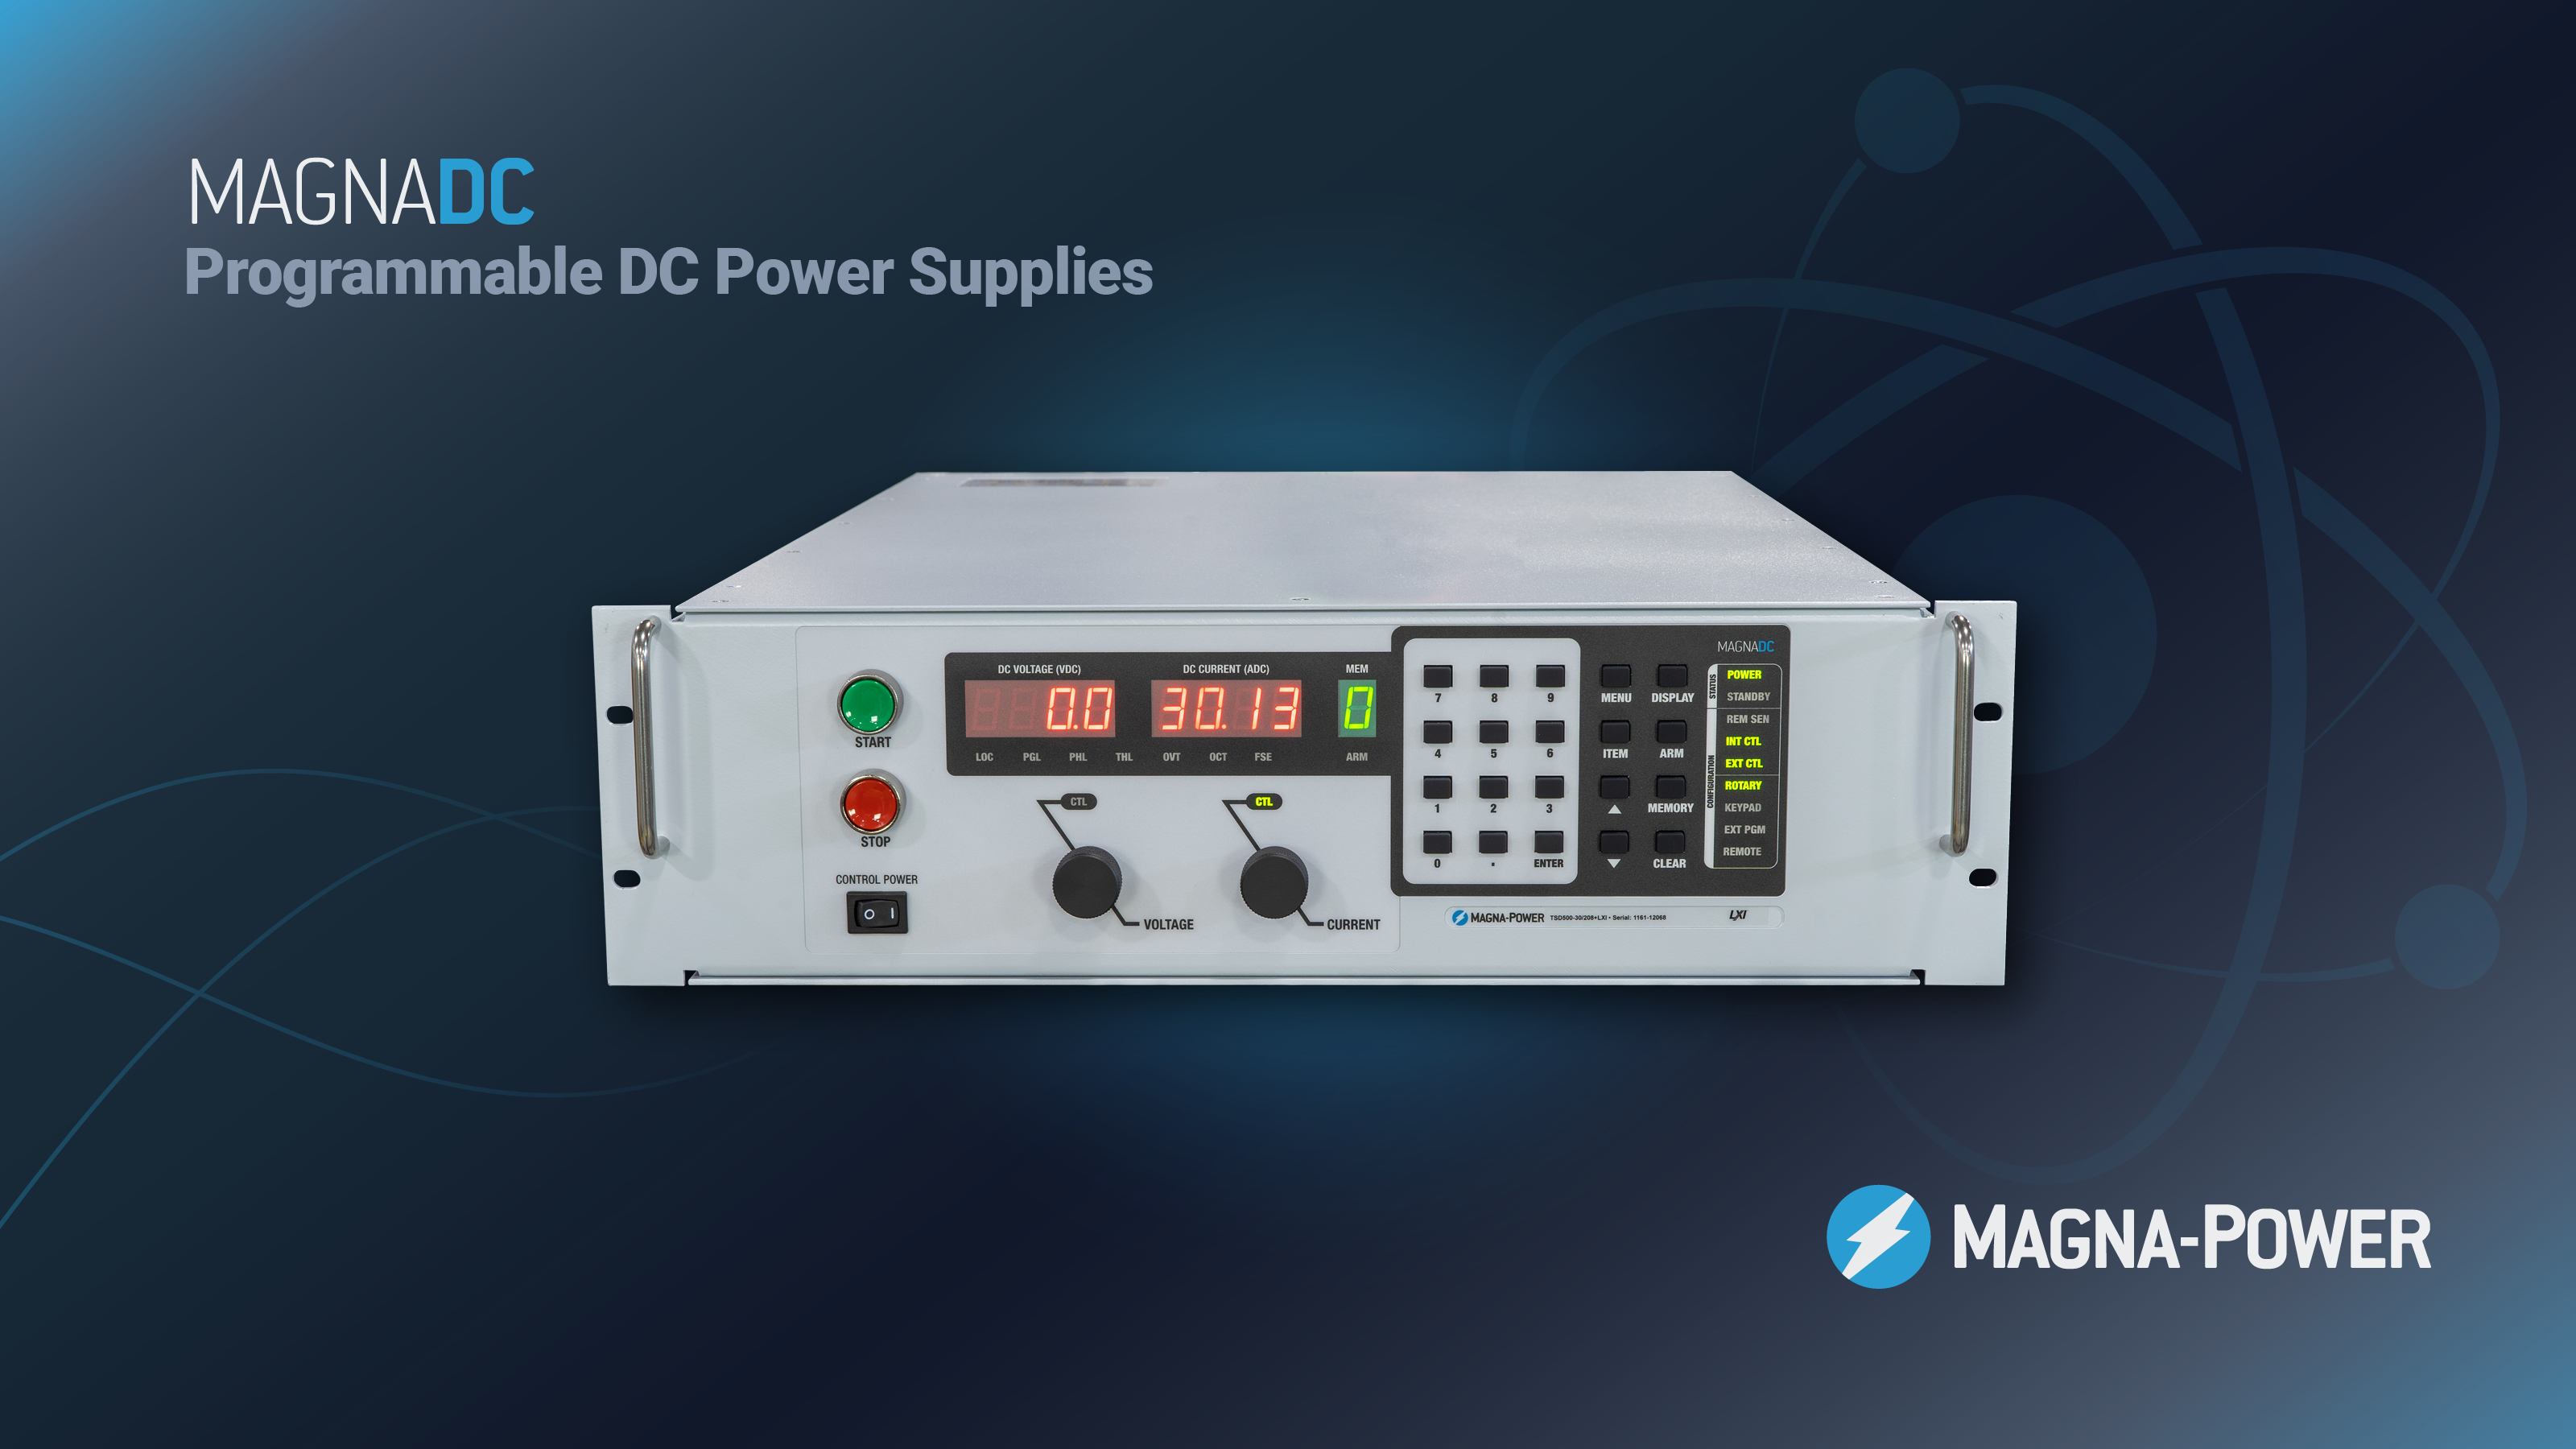 Magna-Power 15 kW water cooled TS Series programmable DC power supply.